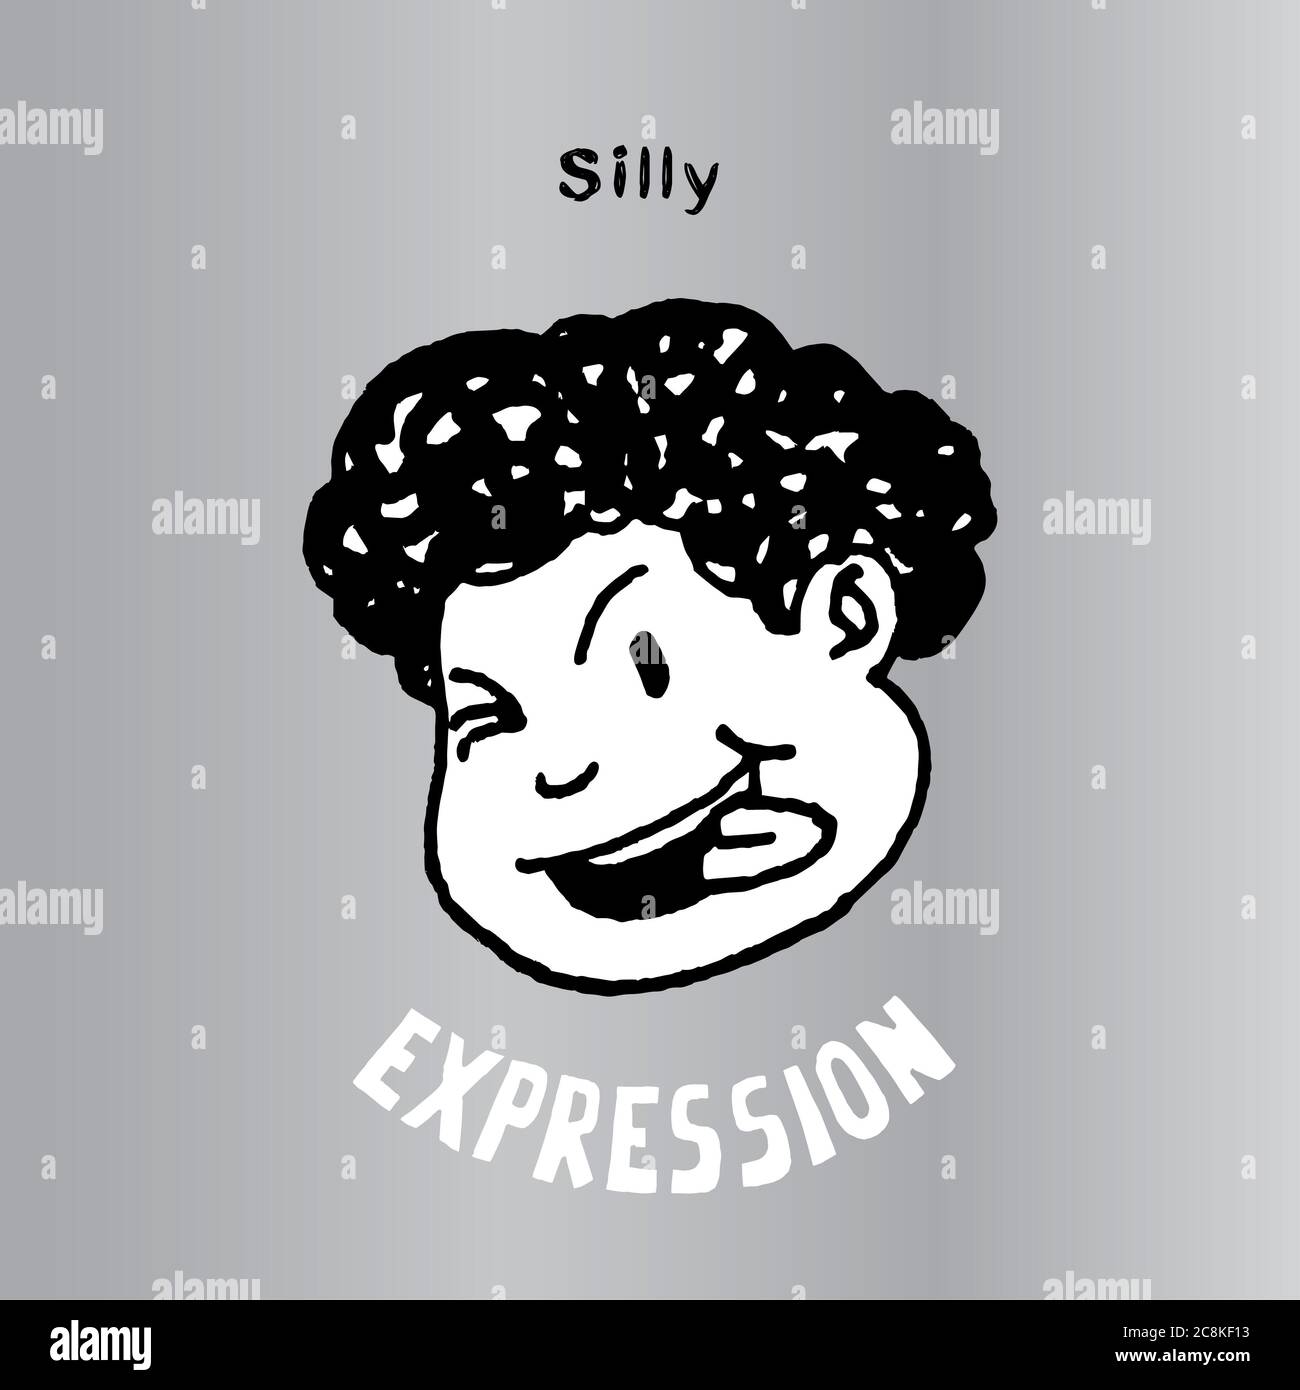 Silly face vector illustration. Interesting Cartoon character. Used as emoticons and emojis. Stock Photo